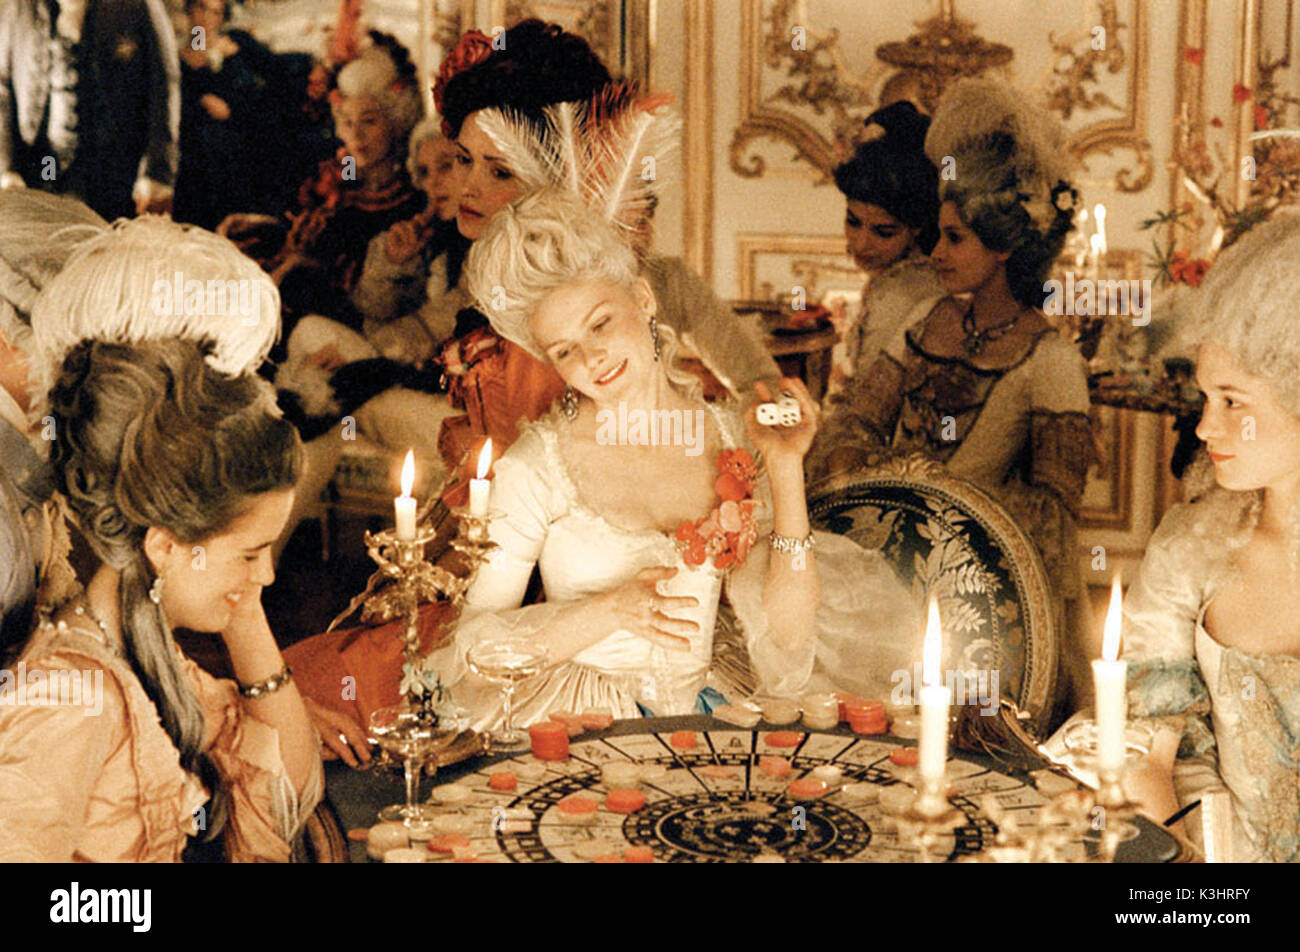 MARIE ANTOINETTE KIRSTEN DUNST as Marie Antoinette Marie Antoinette For further information please contact your Sony Pictures Releasing press office.     Date: 2006 Stock Photo